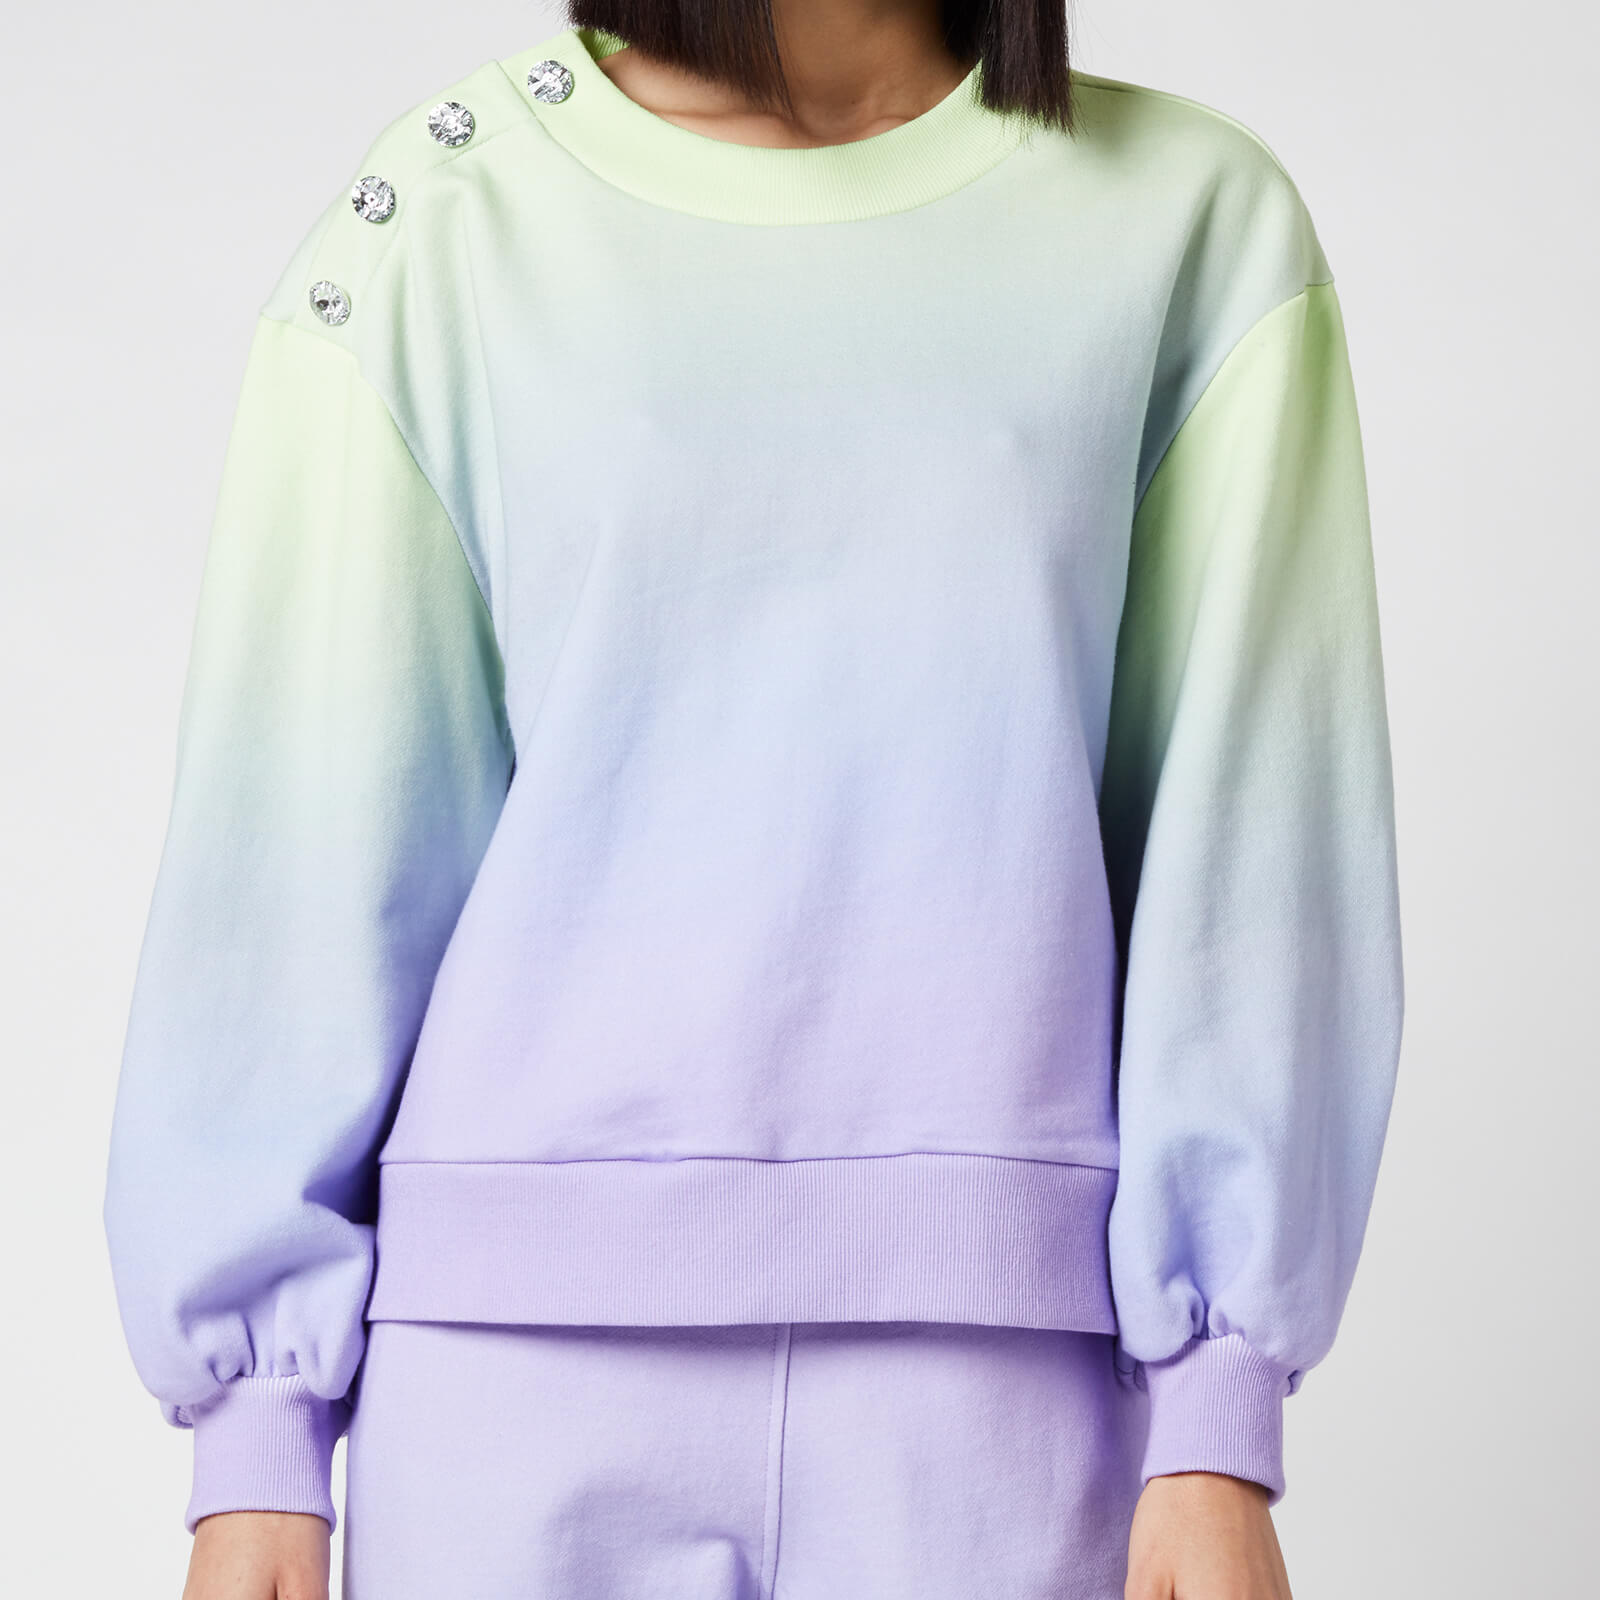 Olivia Rubin Women's Nettie Sweater with Crystal Buttons - Lilac Green Ombre - M